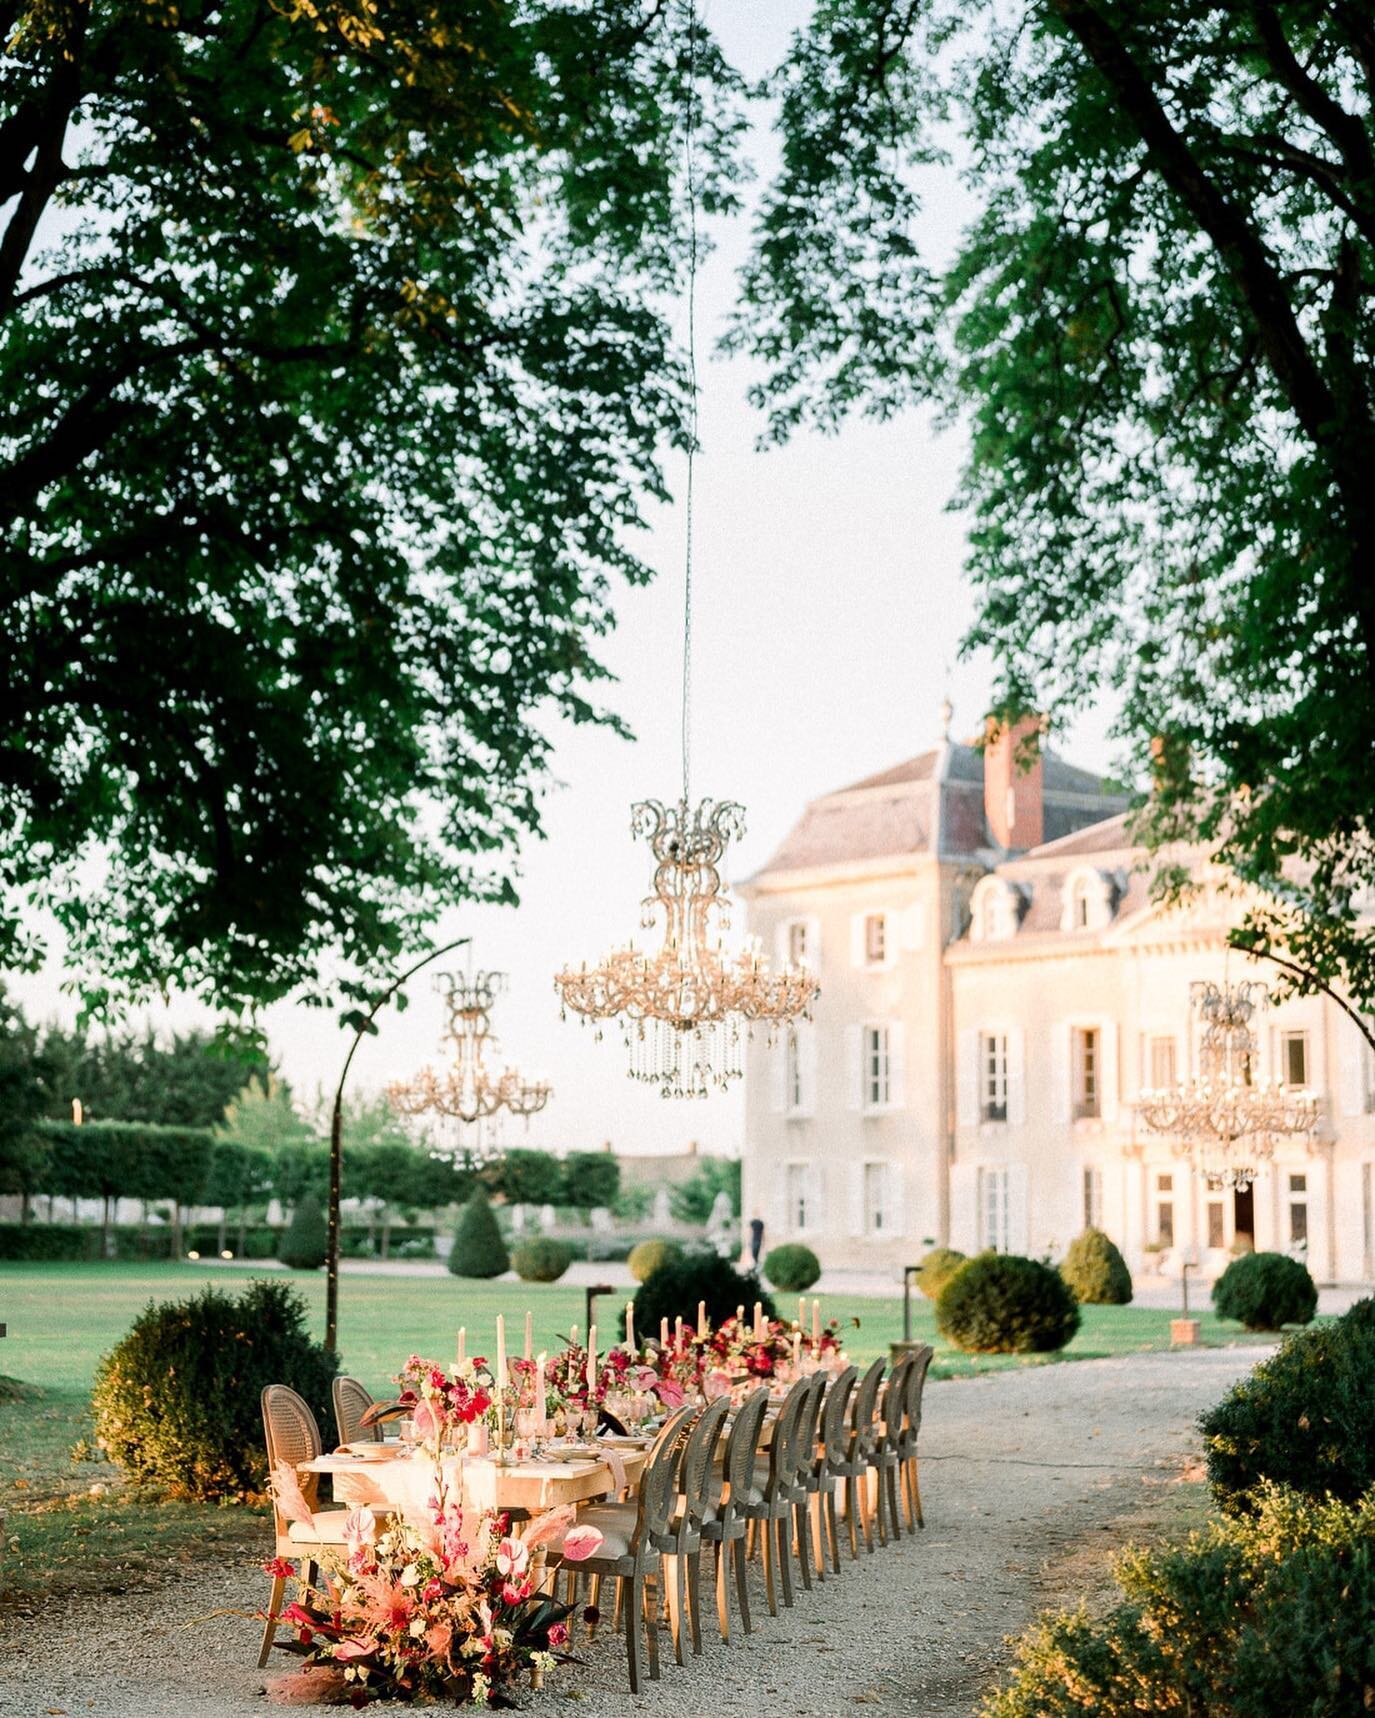 Twinkling crystals, flickering candlelight, &amp; brightly colored florals at the majestic @chateaudevarennes featured in @dwhamagazine 

Wishing you all a relaxing end to the weekend and a work week full of dreaming, planning and good vibes. 

Plann